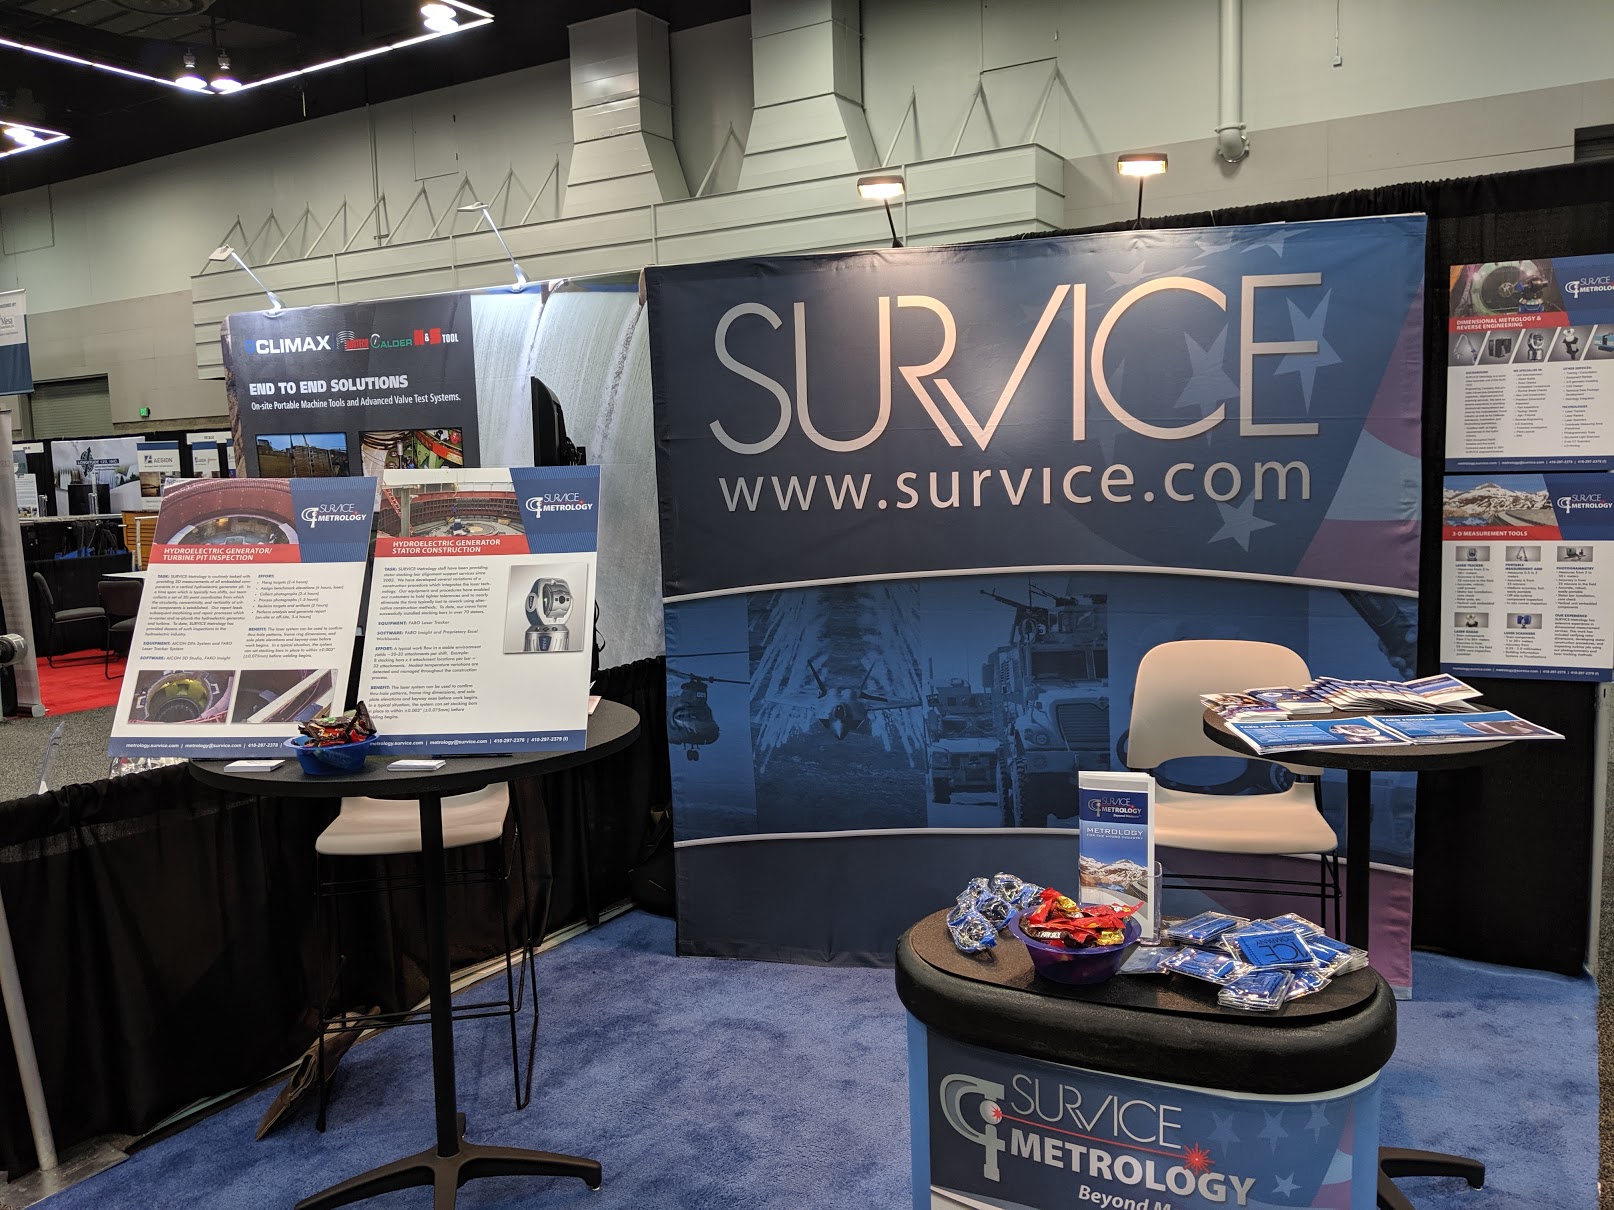 SURVICE booth at Hydrovision